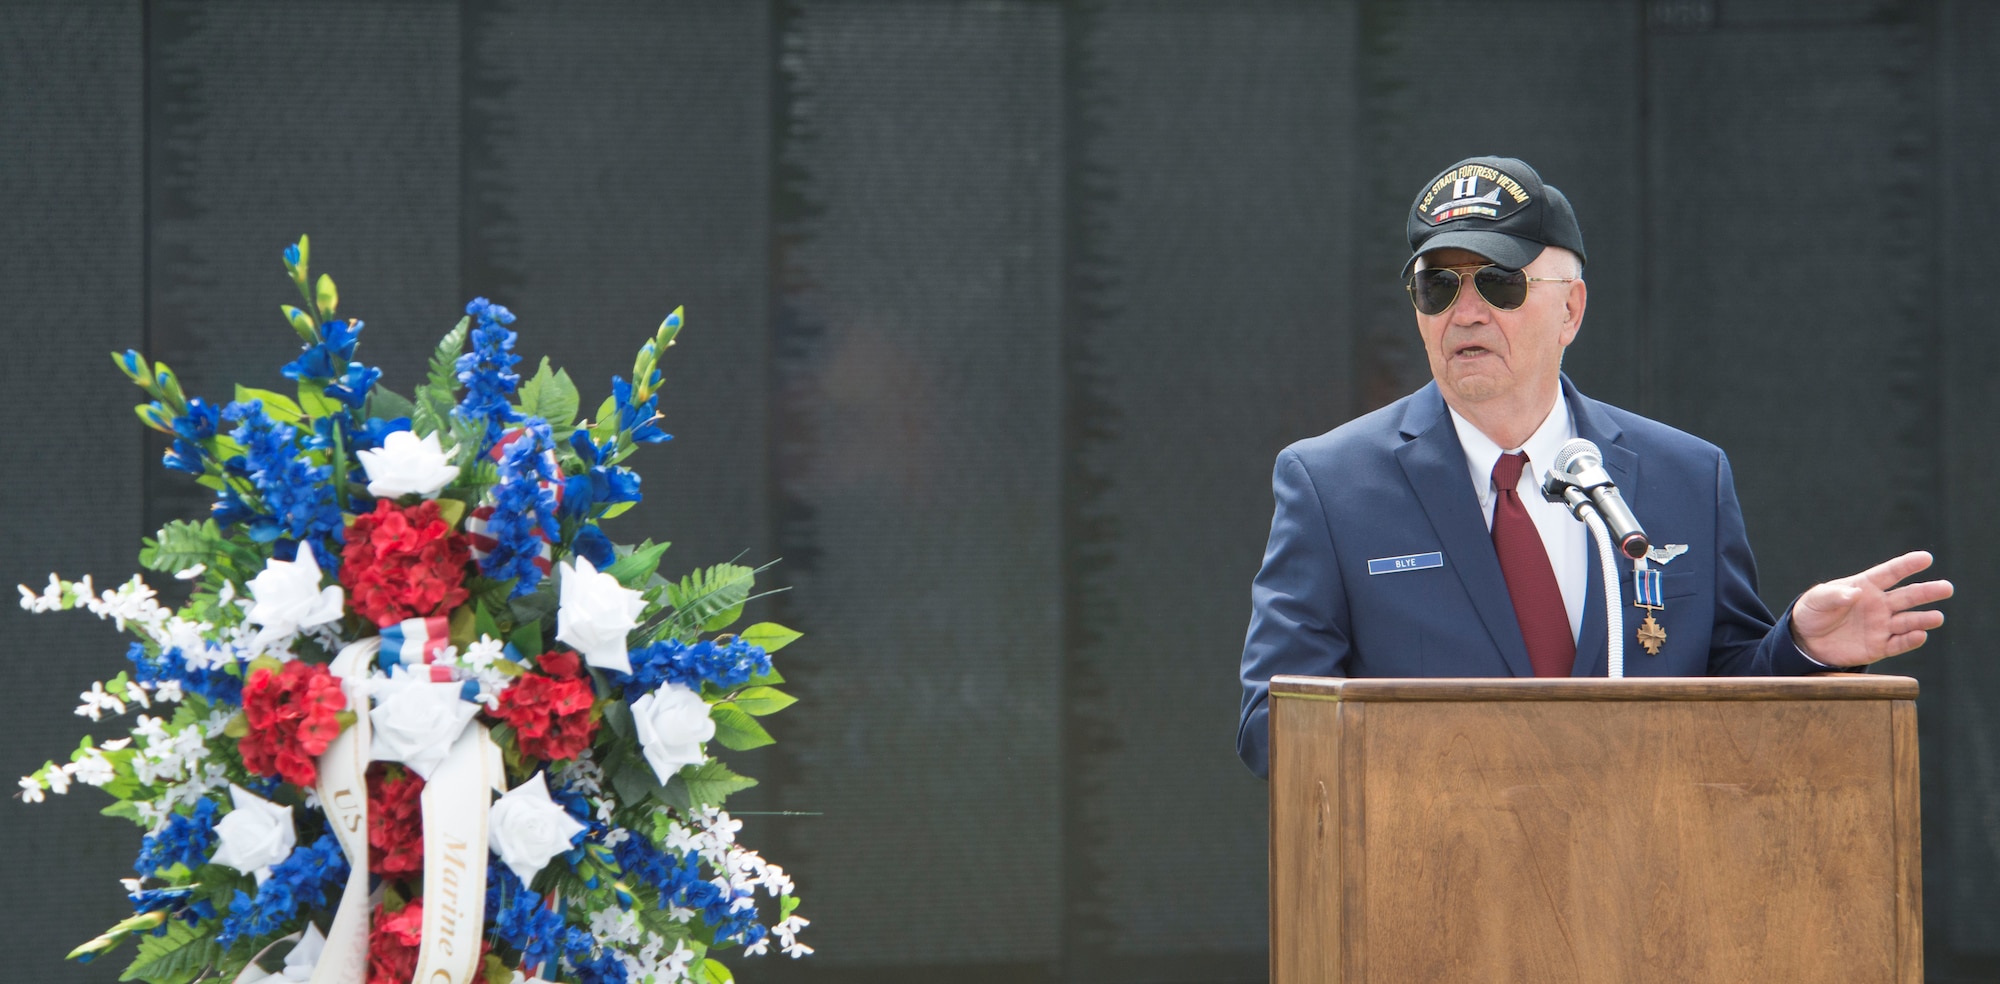 Retired Air Force Capt. Johnny Blye speaks at The Wall That Heals in Camden, S.C., May 5, 2018.